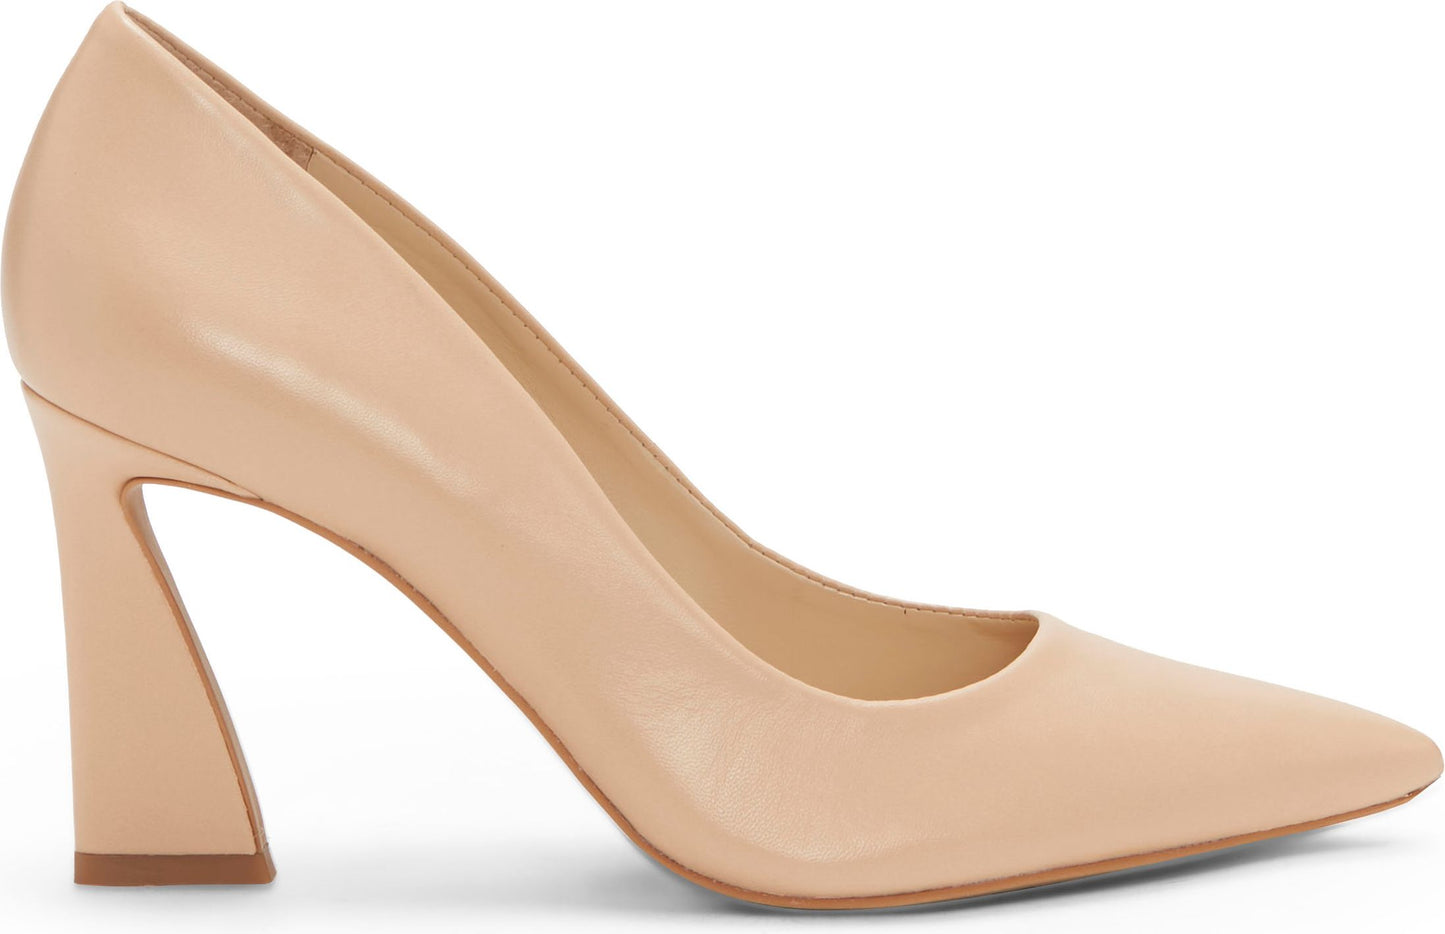 Vince Camuto Shoes Thanley Egyptian Sandstone